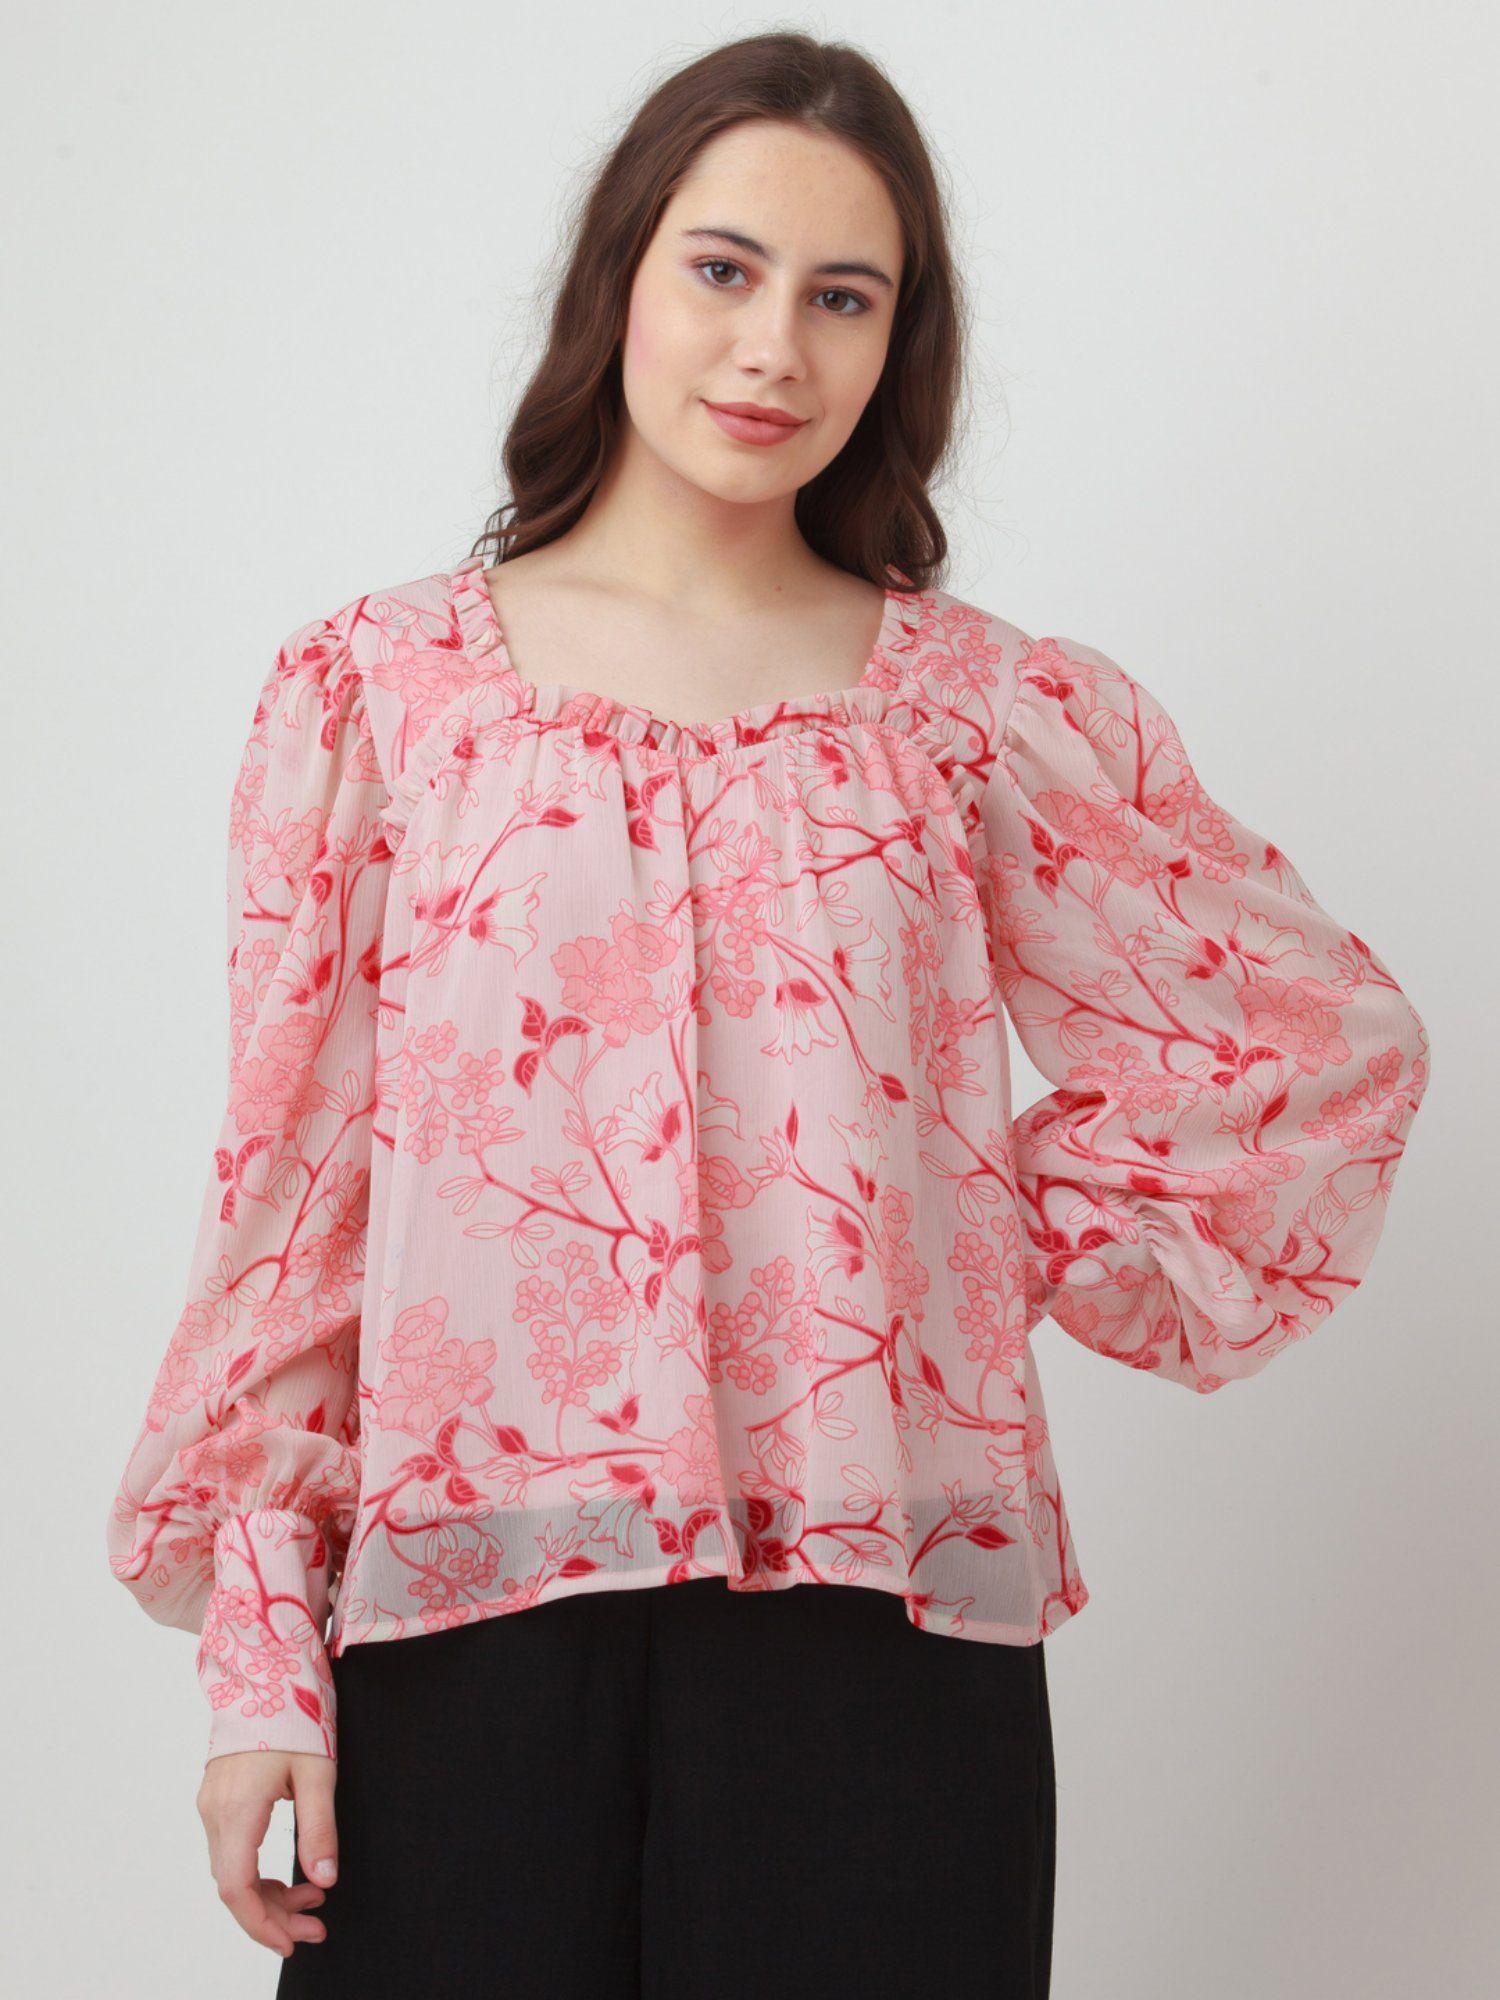 womens pink floral top